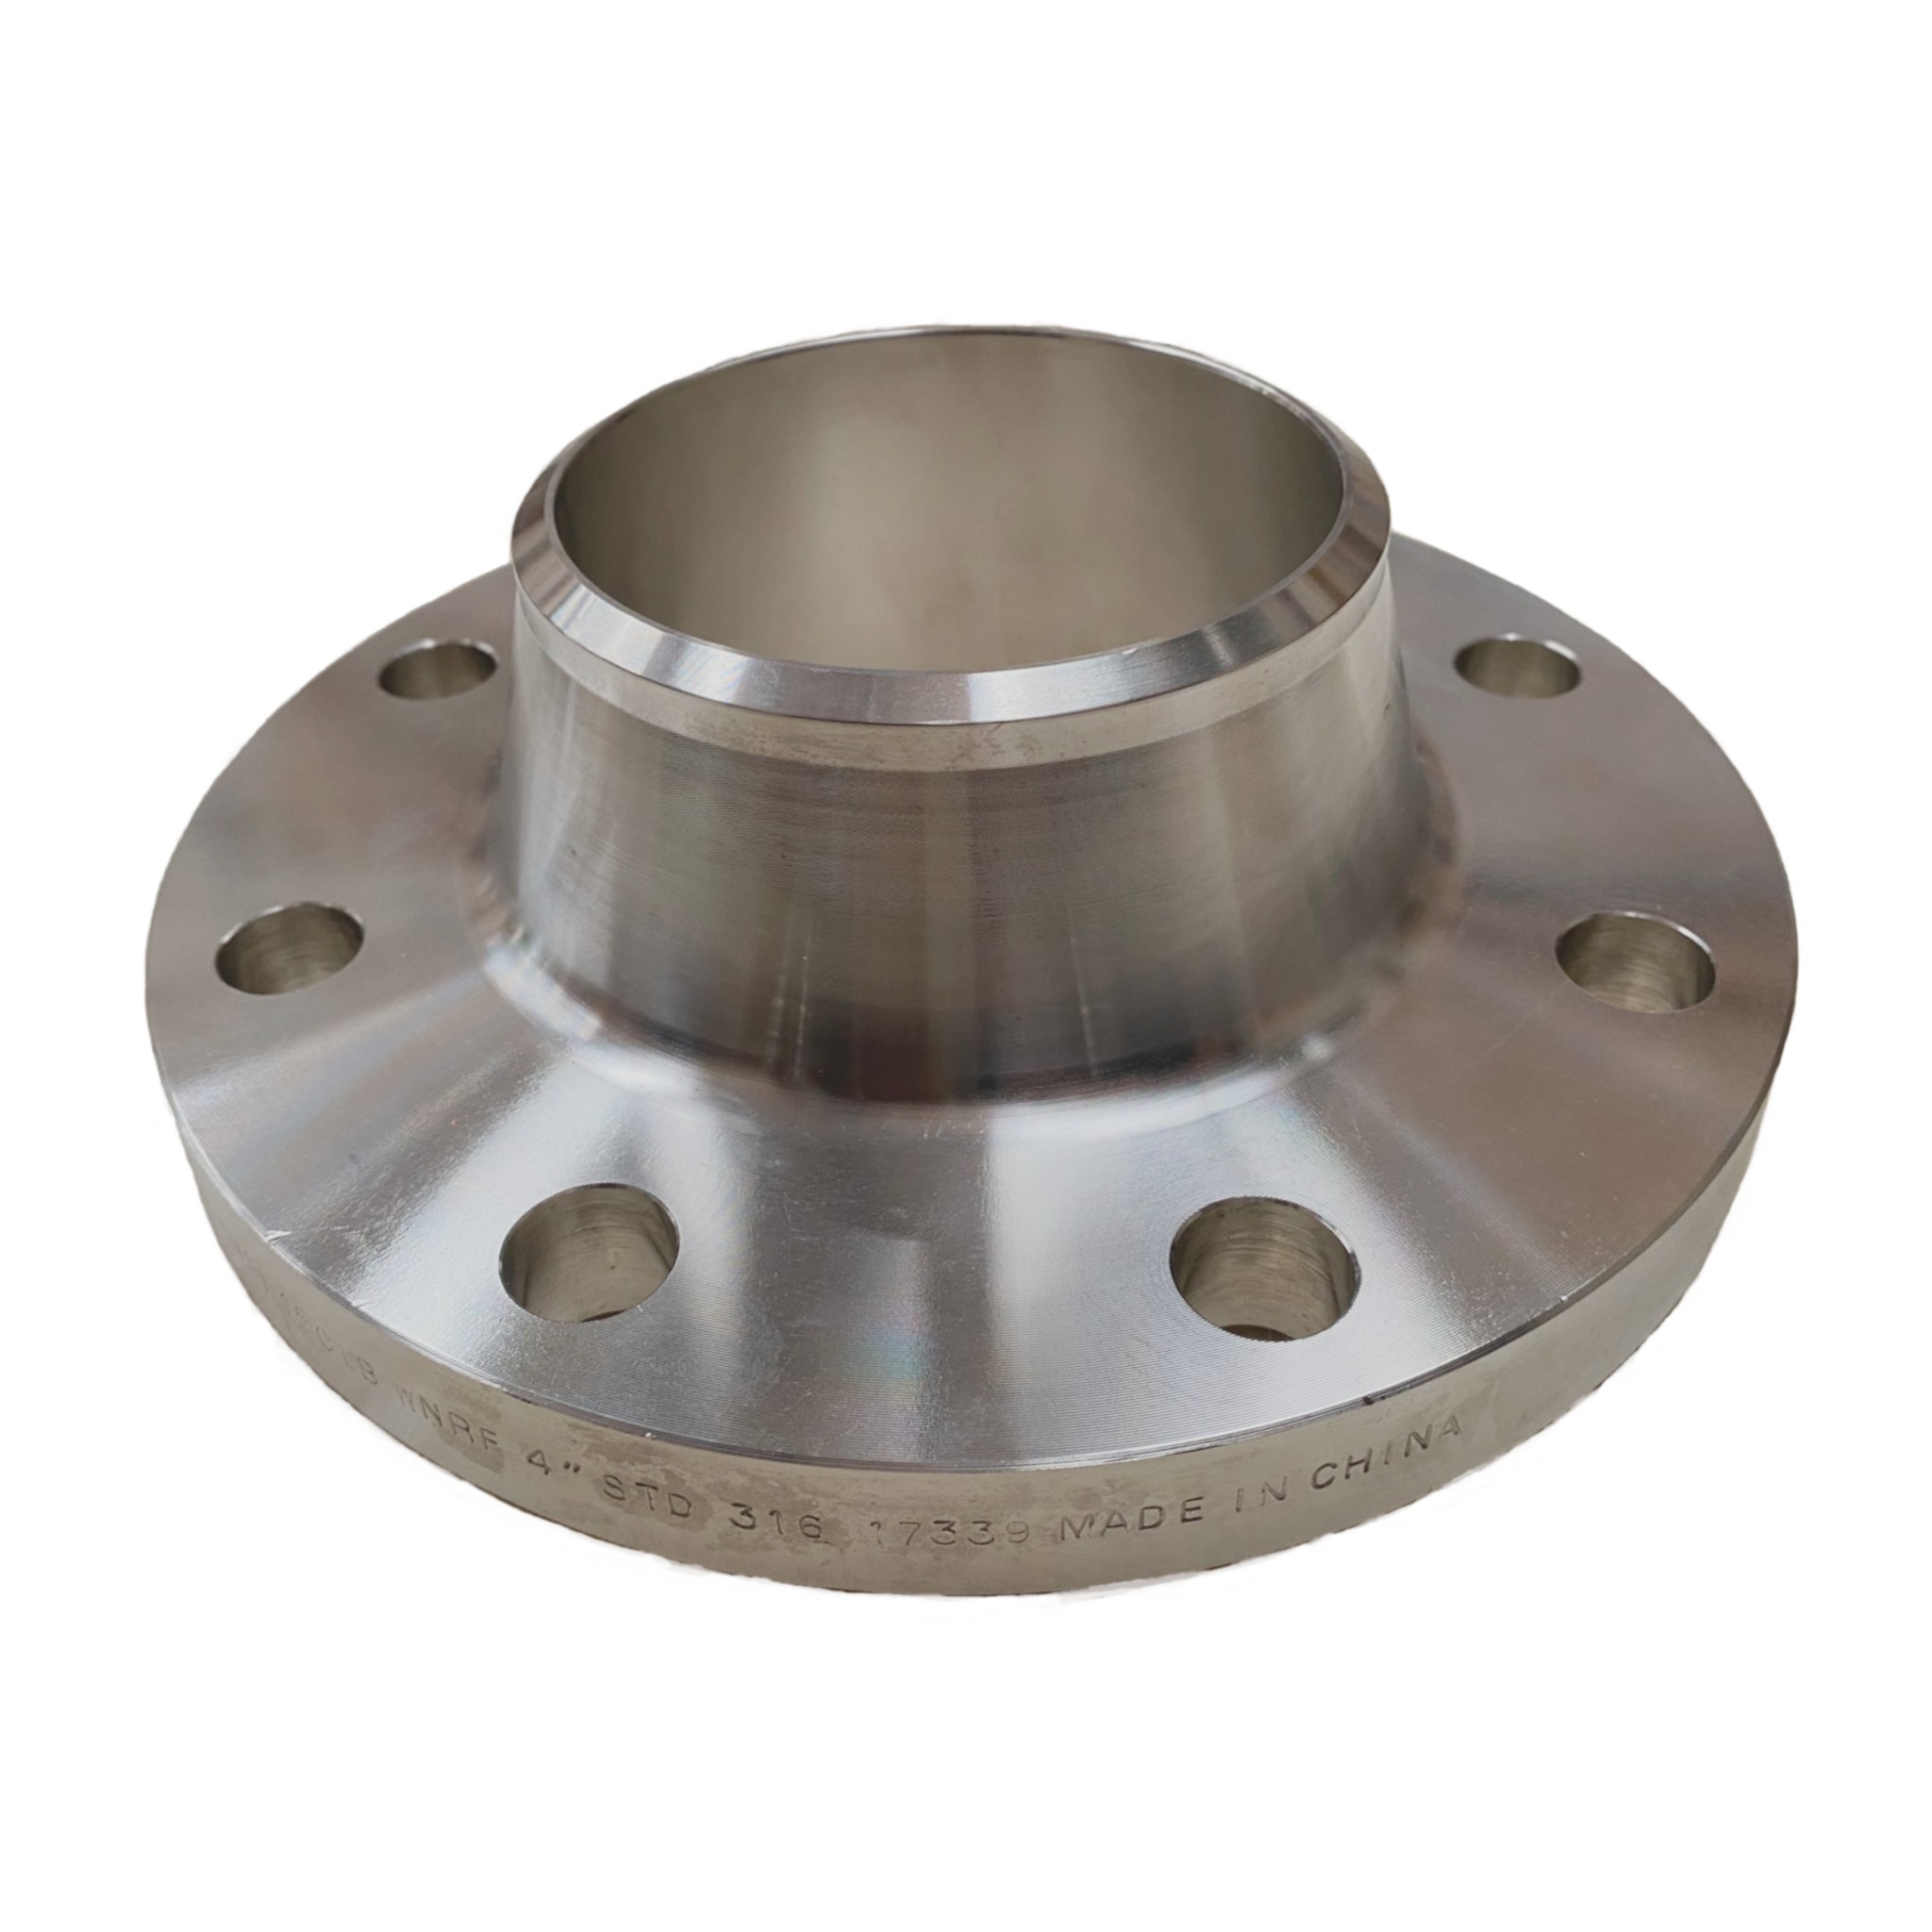 Ss316 Flange Ansi 150 Raised Face Weld Neck Unimech Asia Pacific 6181